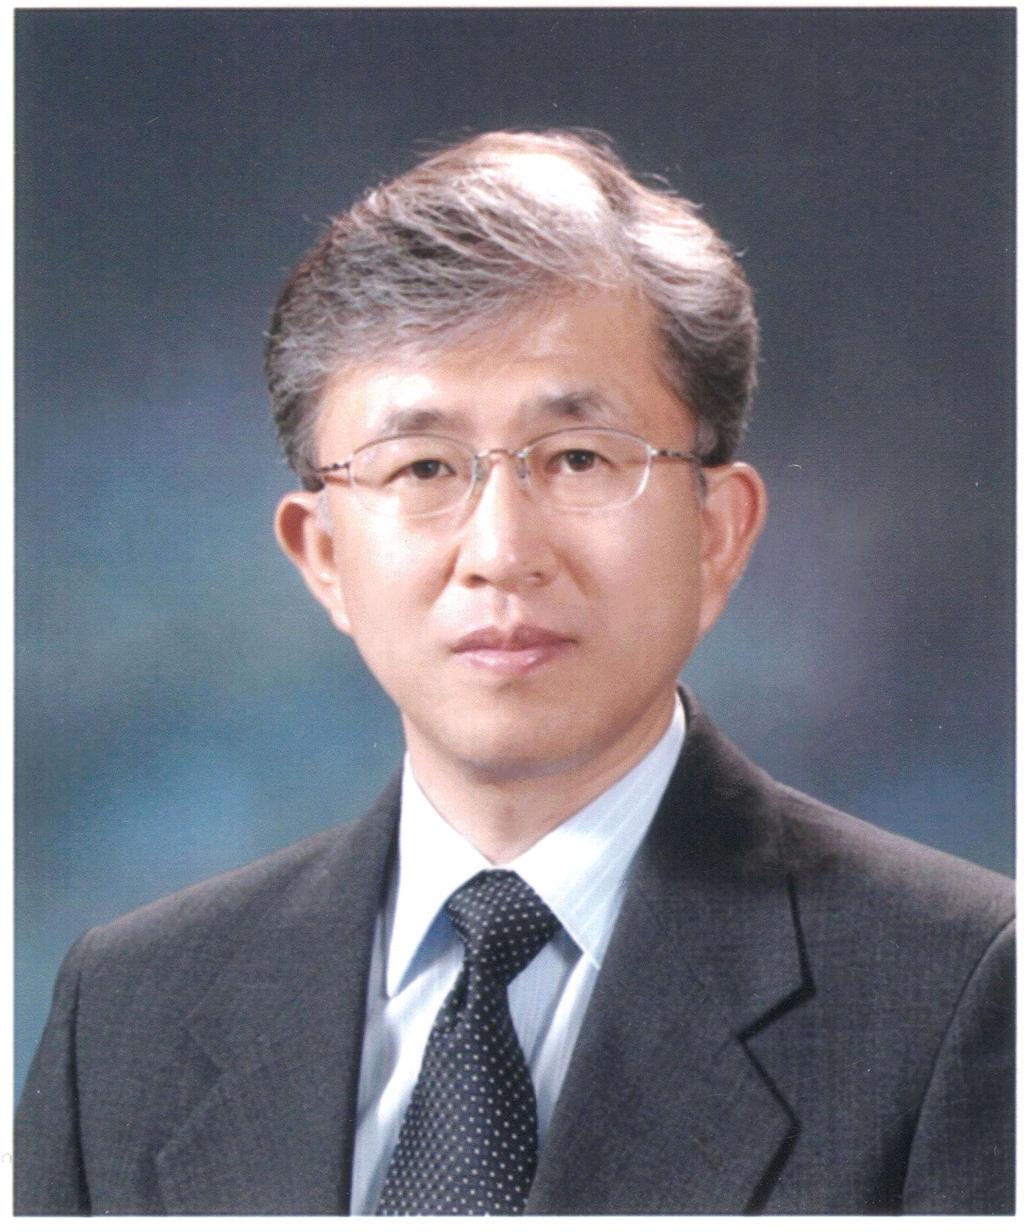 THE JOURNAL OF KOREAN INSTITUTE OF ELECTROMAGNETIC ENGINEERING AND SCIENCE. vol. 28, no. 5, May 2017.